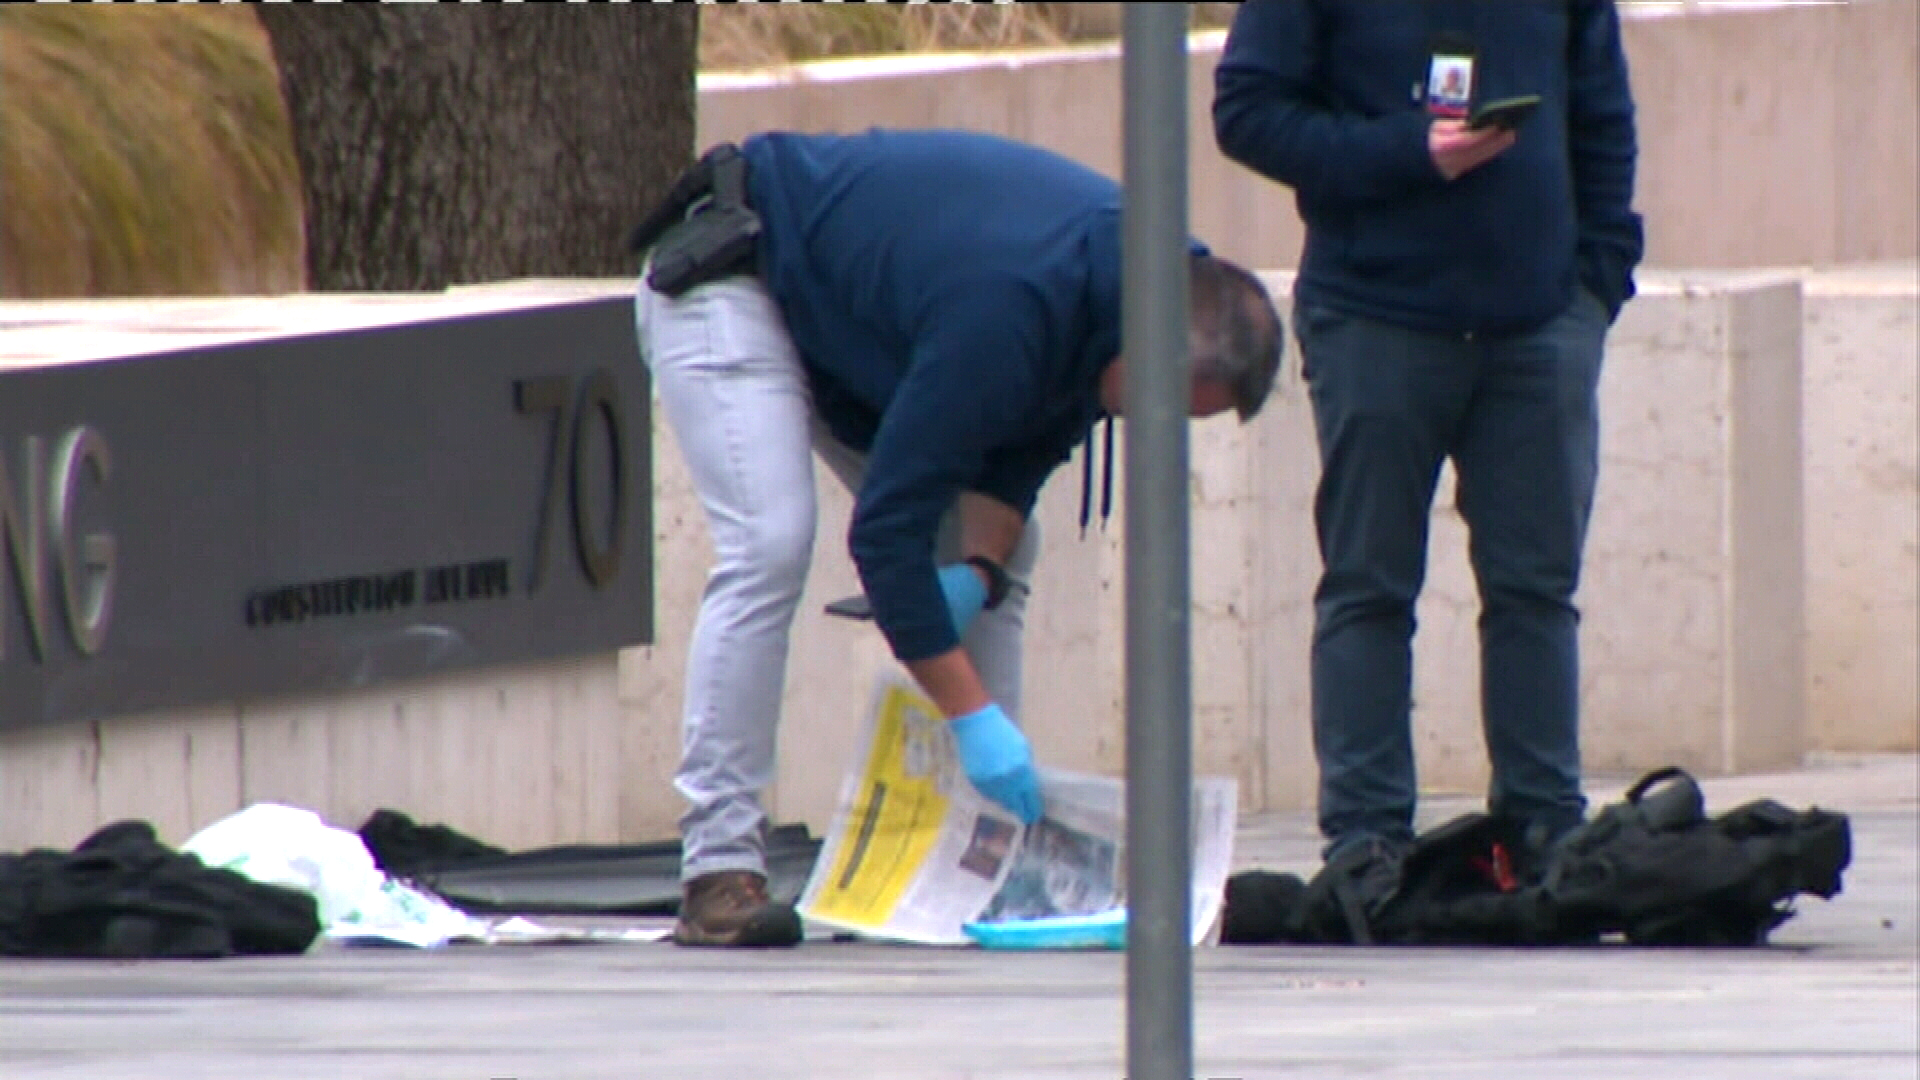 An armed, plain clothes officer looks over items on the ground, in front of the ASIO headquarters.